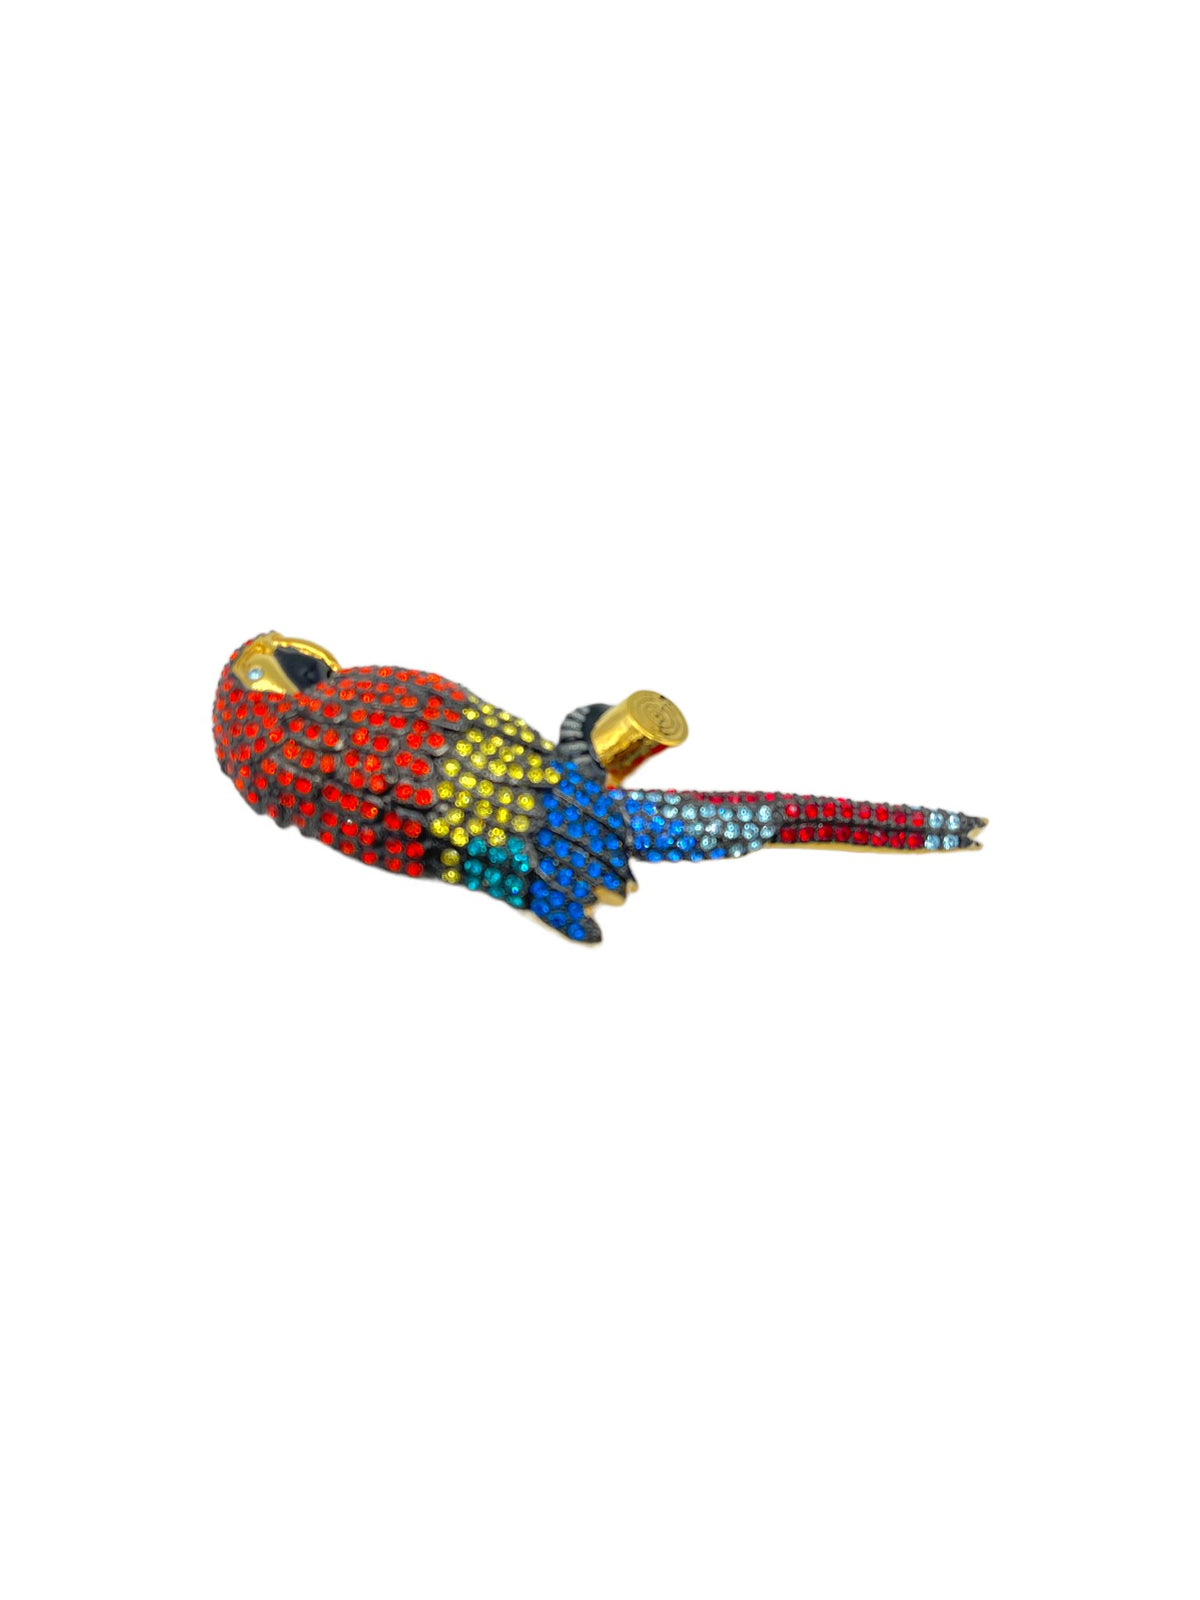 Joan Rivers Limited Edition Large Exotic Crystal Macaw Bird Vintage Brooch - 24 Wishes Vintage Jewelry